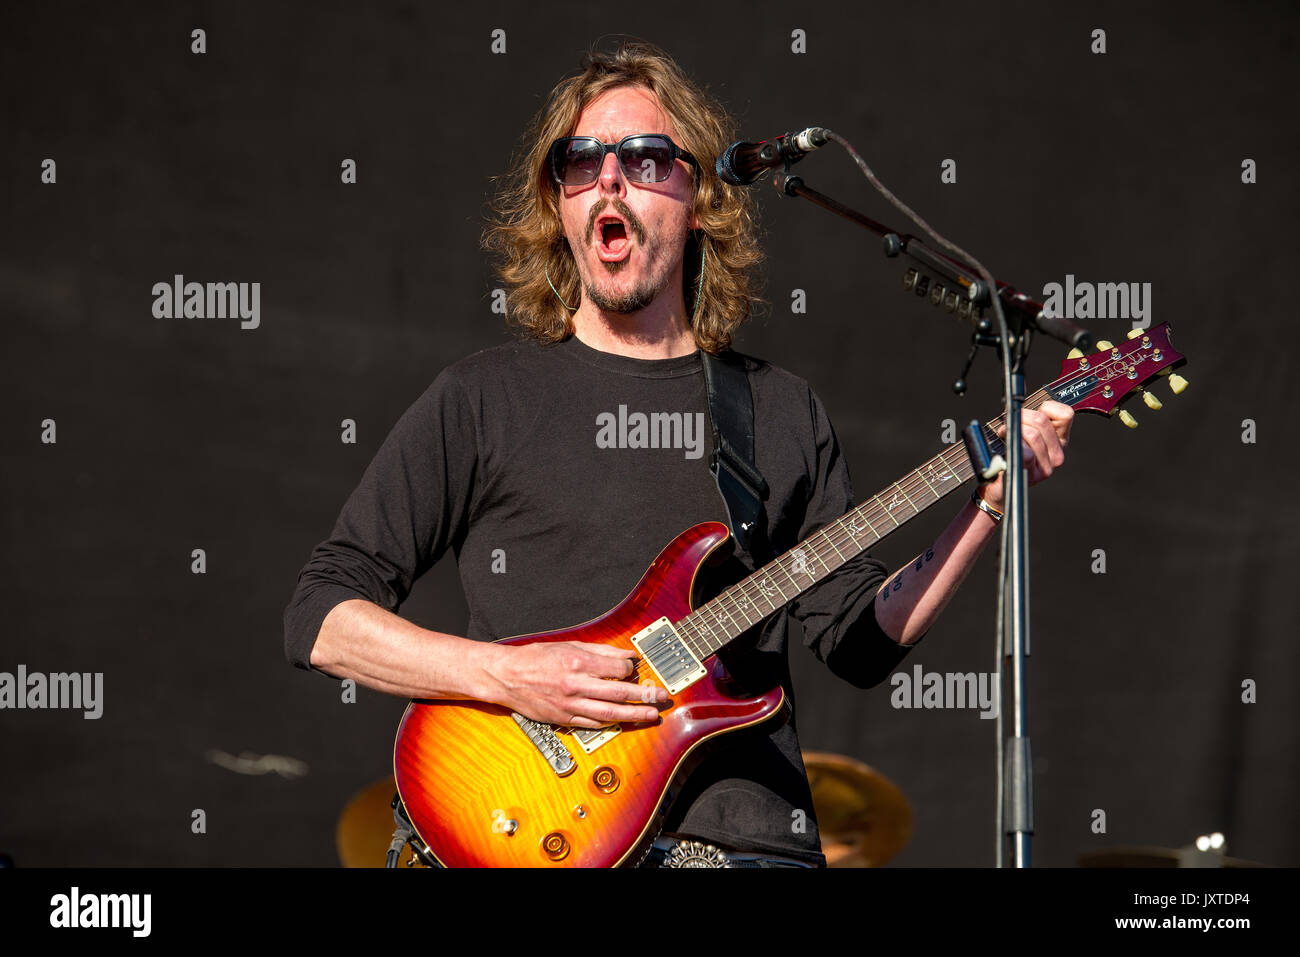 MADRID - JUN 23: Opeth (rock music band) perform in concert at Download (heavy metal music festival) on June 23, 2017 in Madrid, Spain. Stock Photo